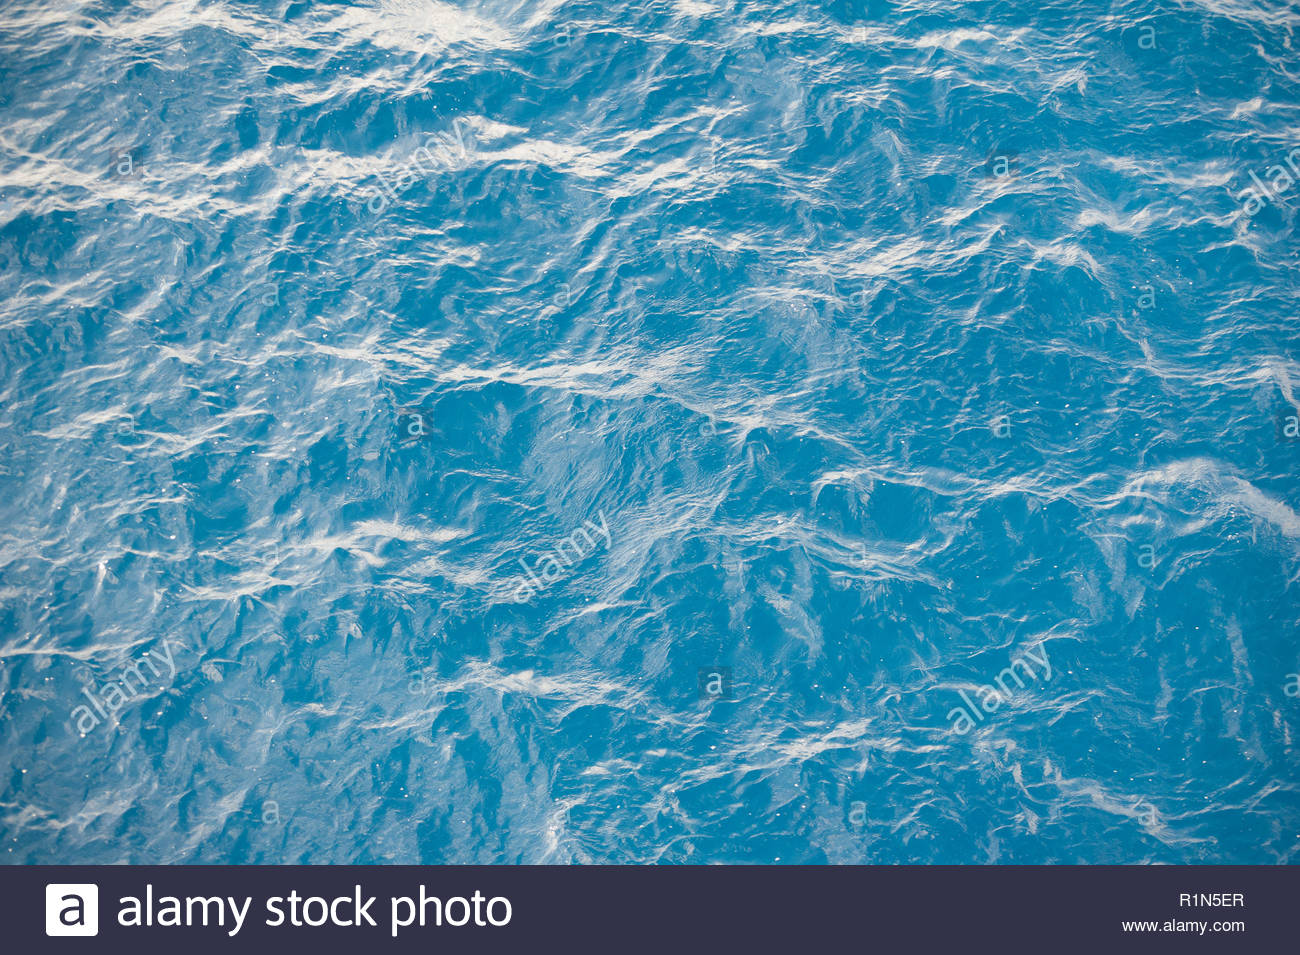 High Angle Blue Ripple Water Background Texture Mediterranean Sea